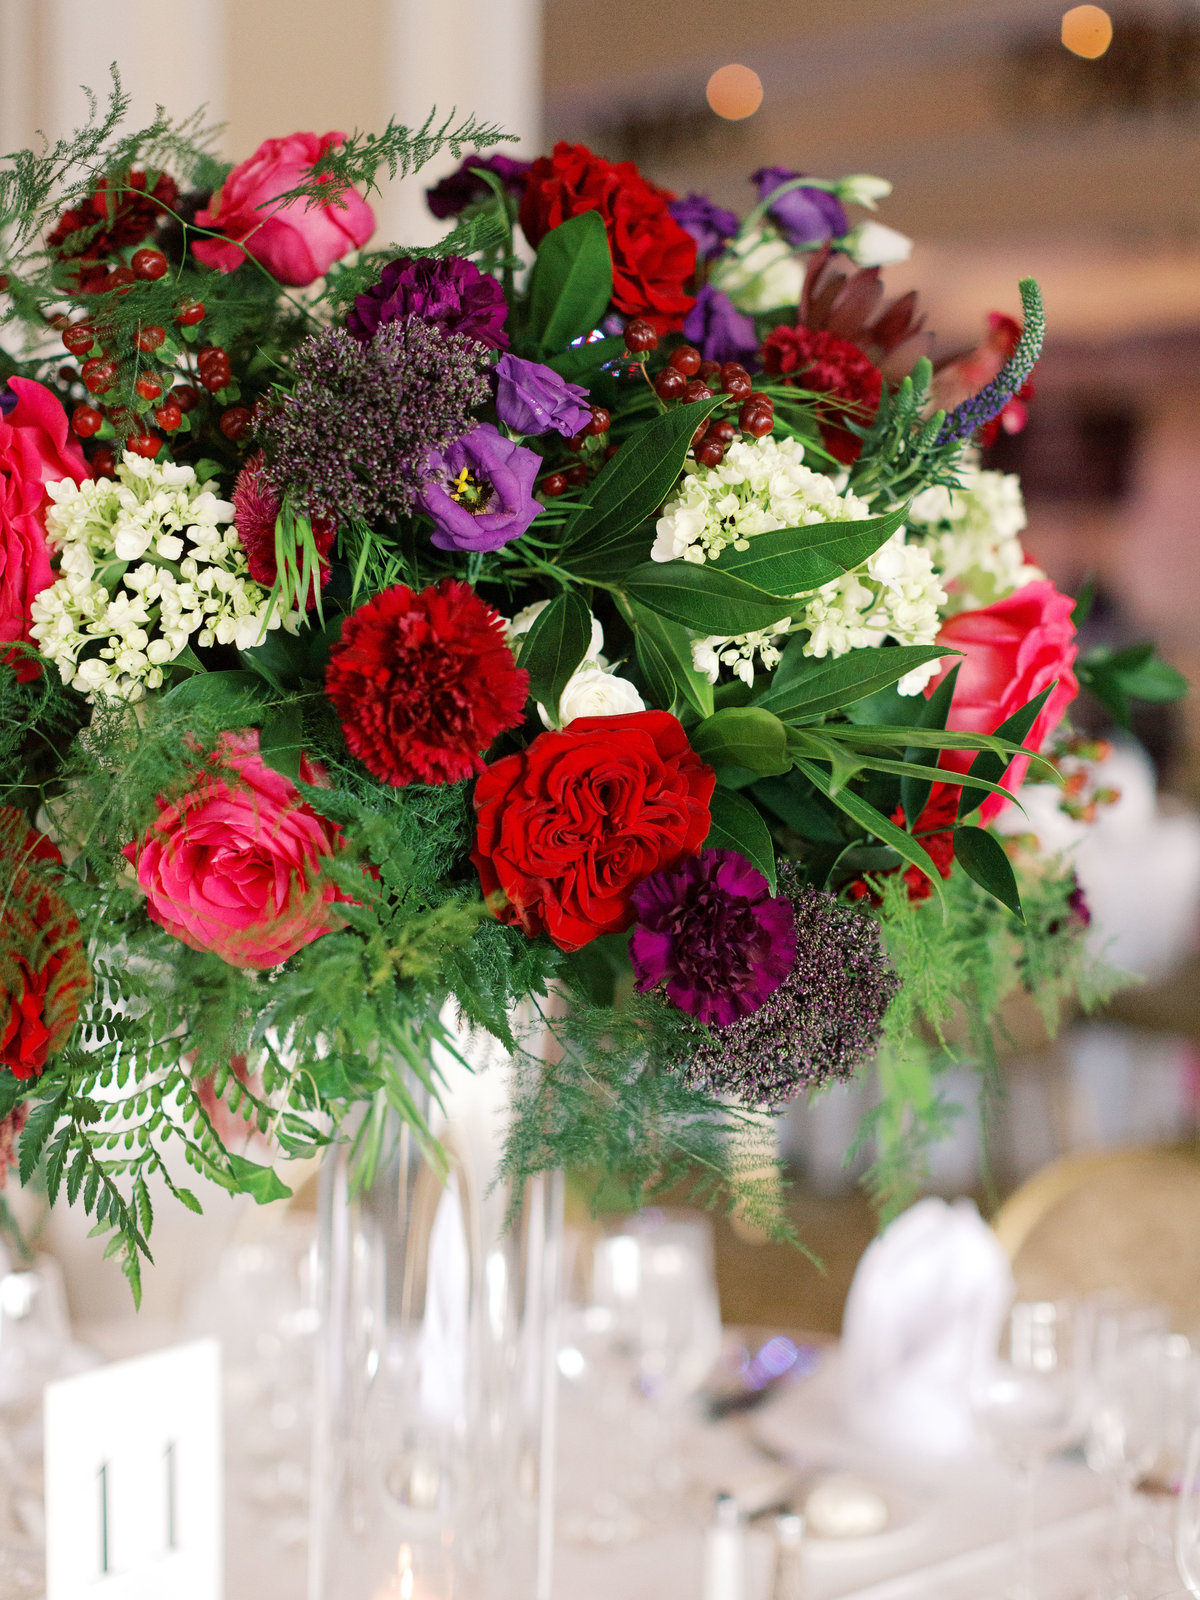 Elevated floral arrangement with jewel toned flowers